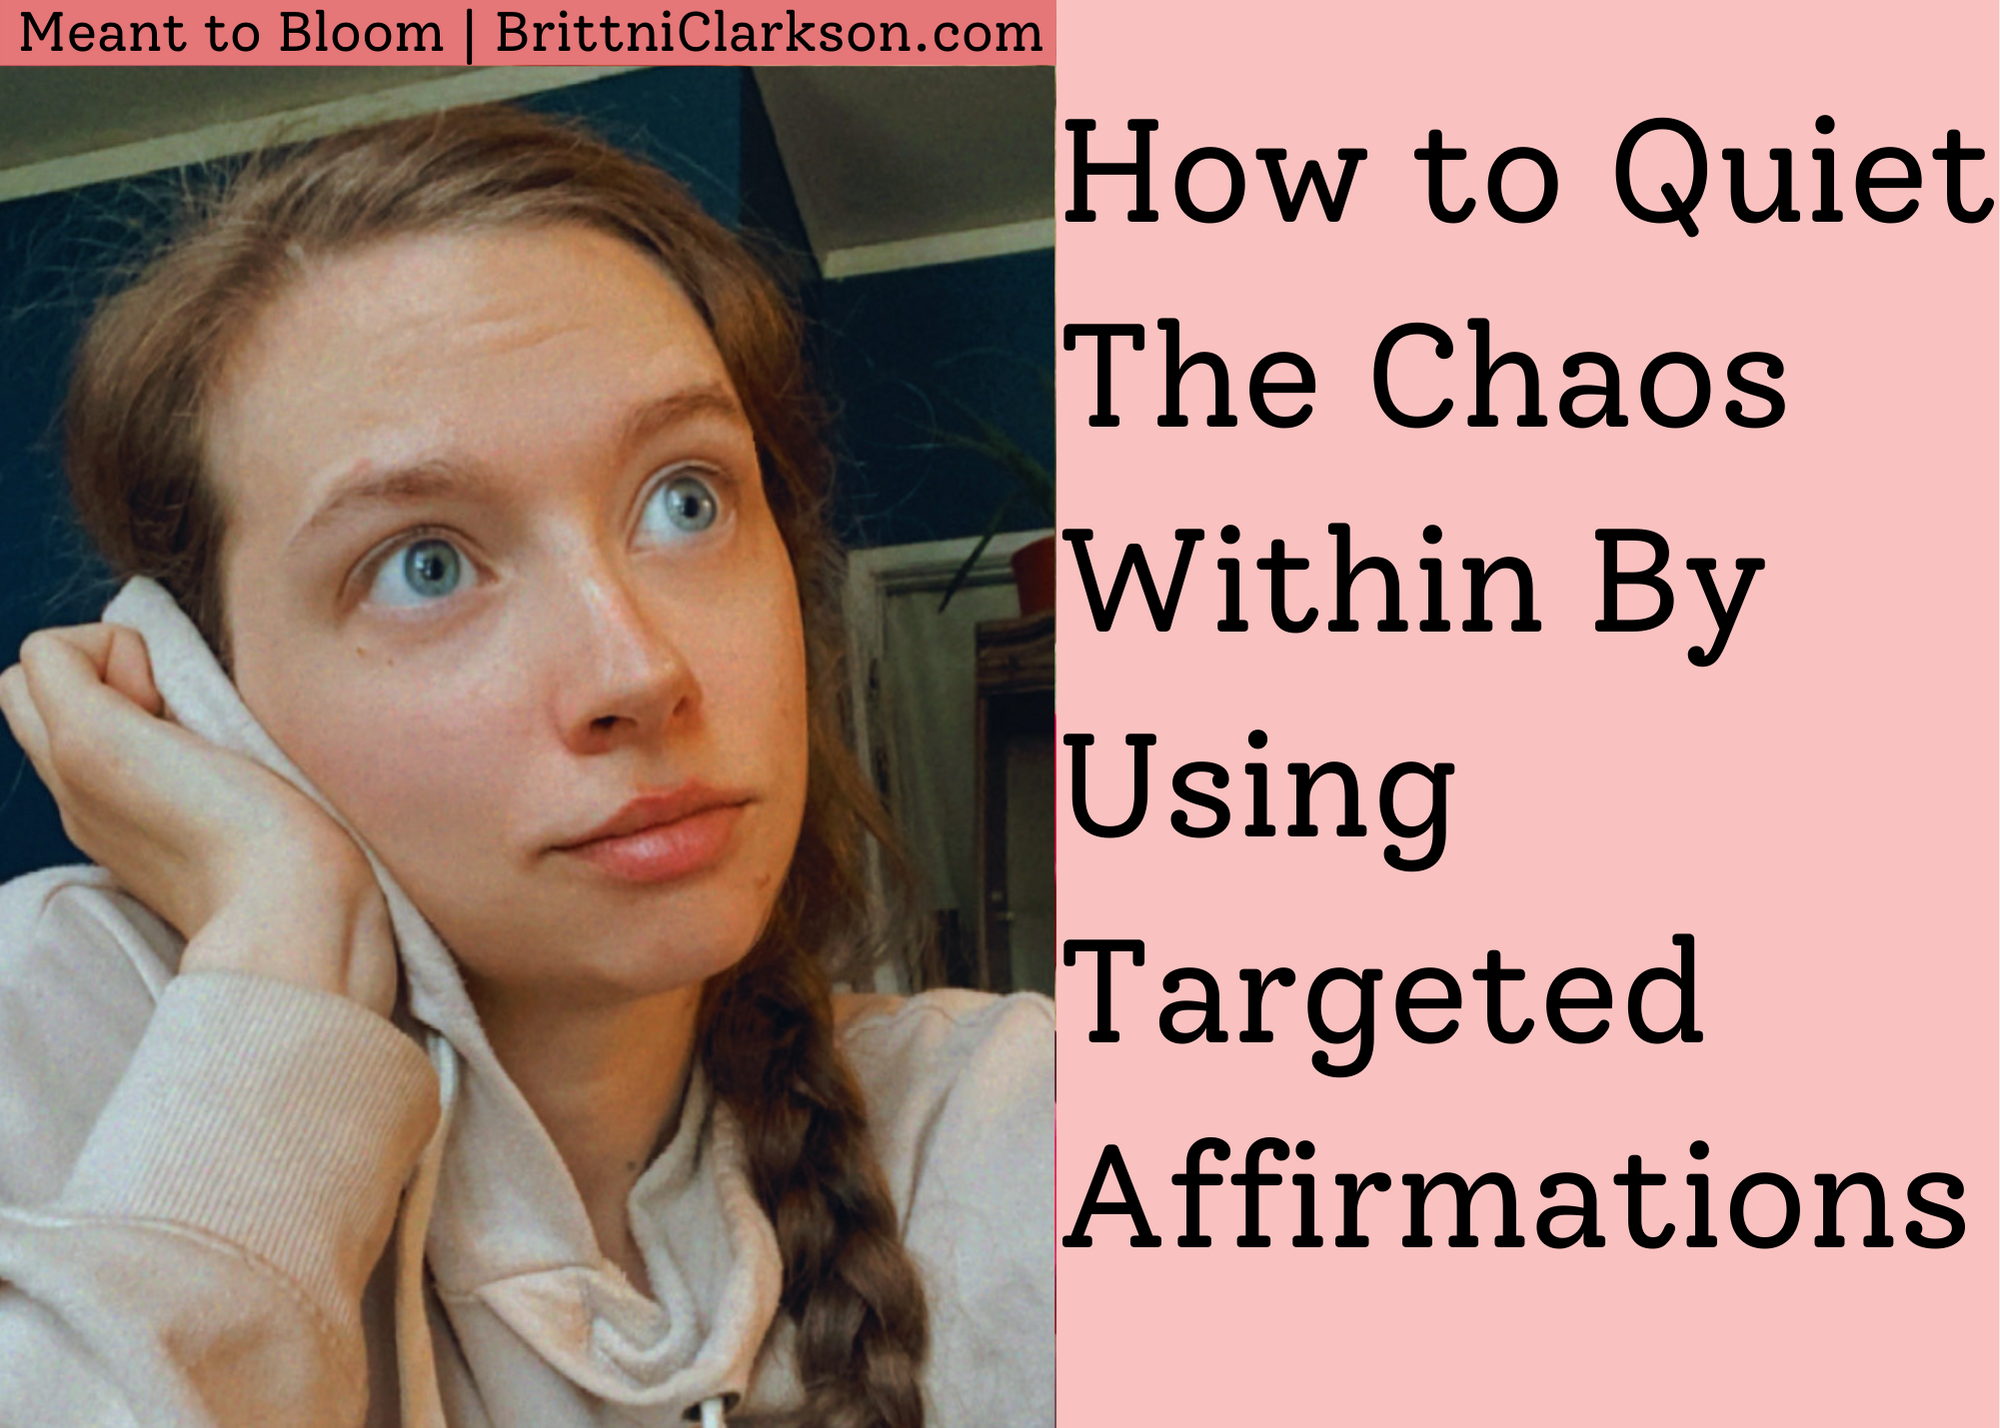 How to Quiet the Chaos Within With Affirmations